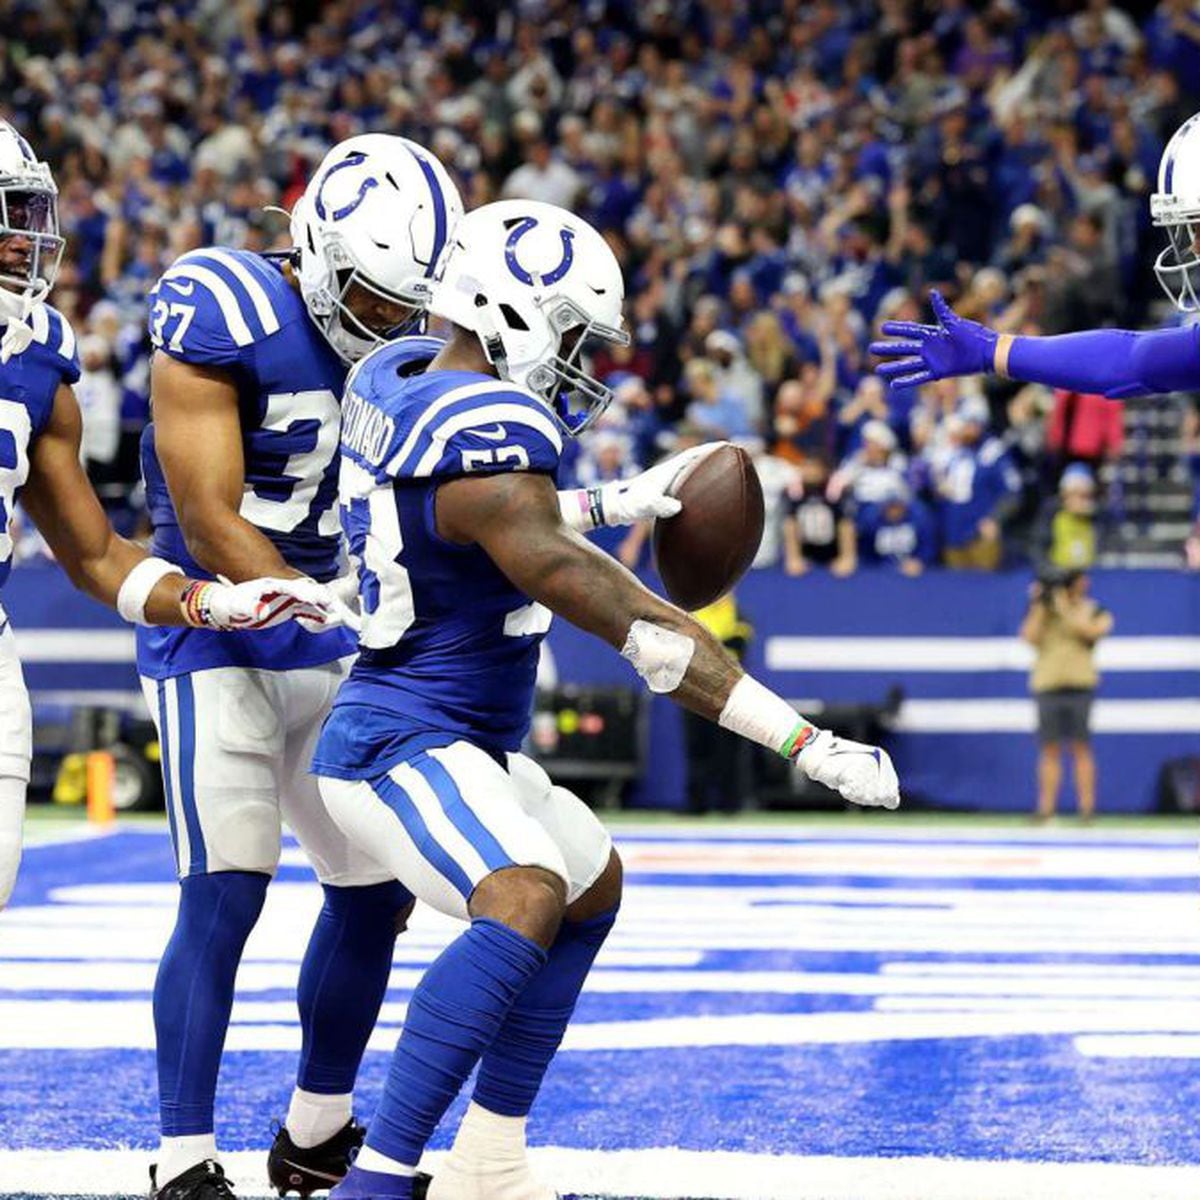 Colts 27, Bucs 10: Everything you need to know